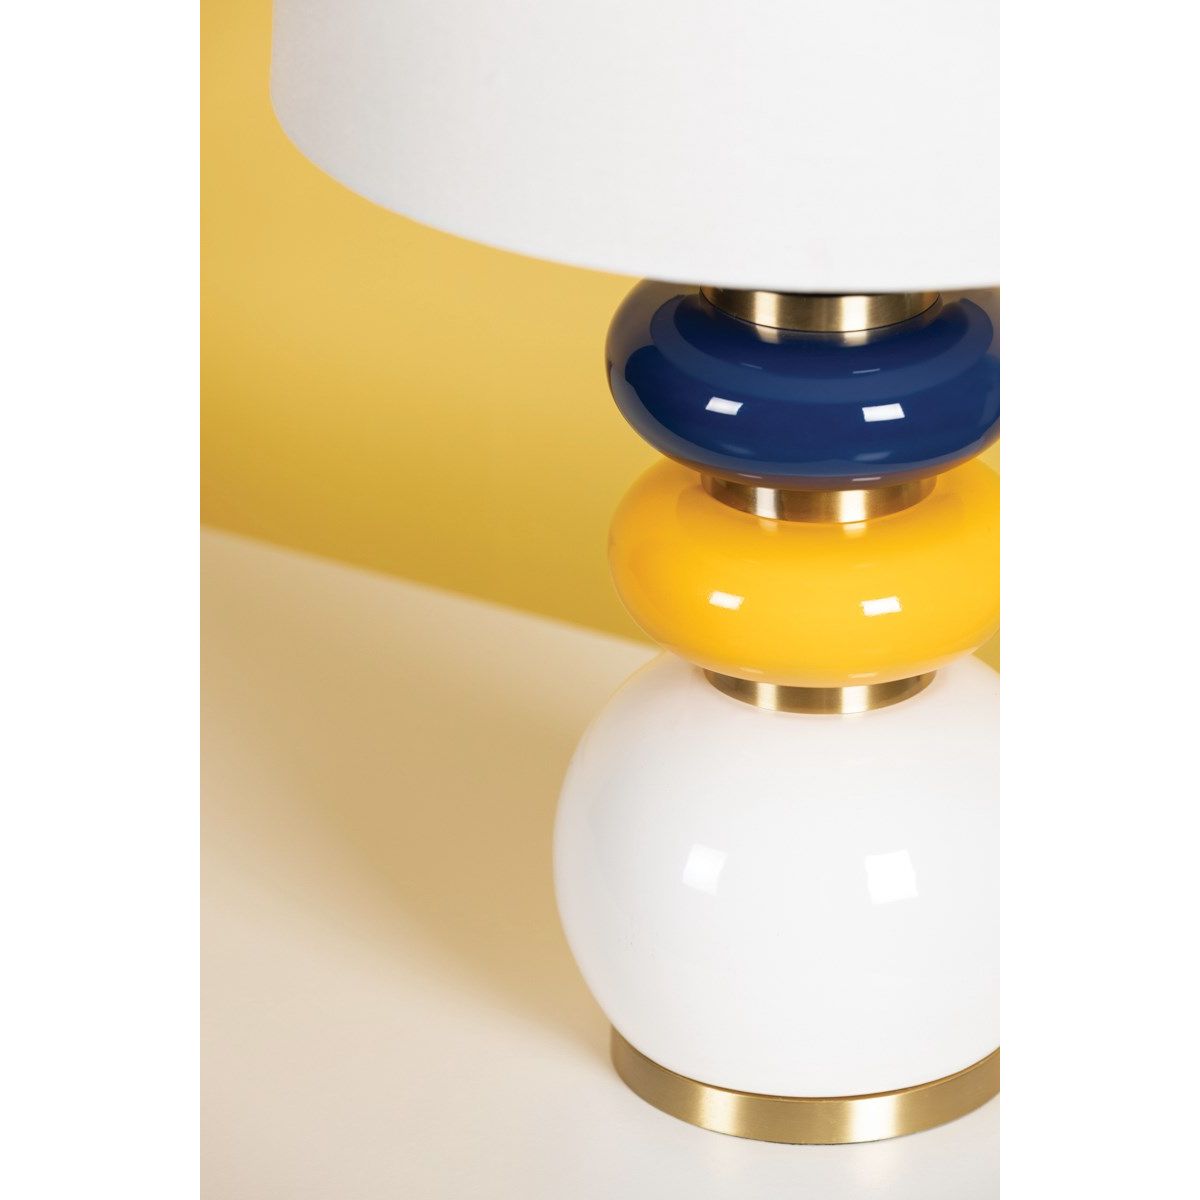 Robyn 1-Light Table Lamp